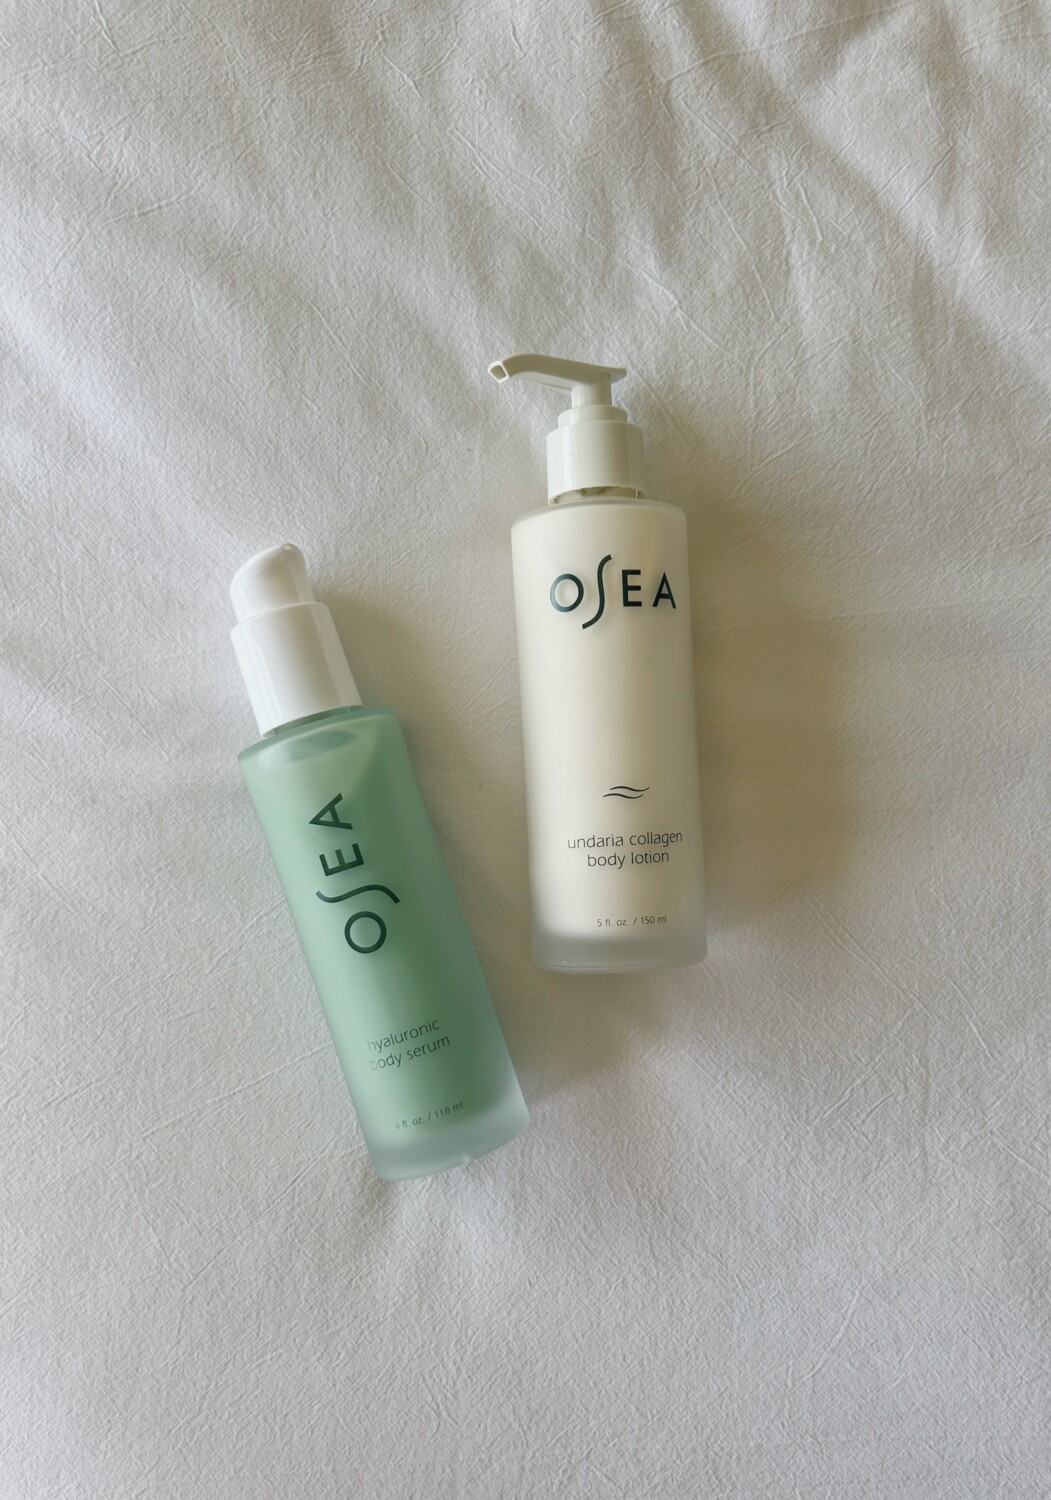 A bottle of Osea body serum and Osea collagen lotion